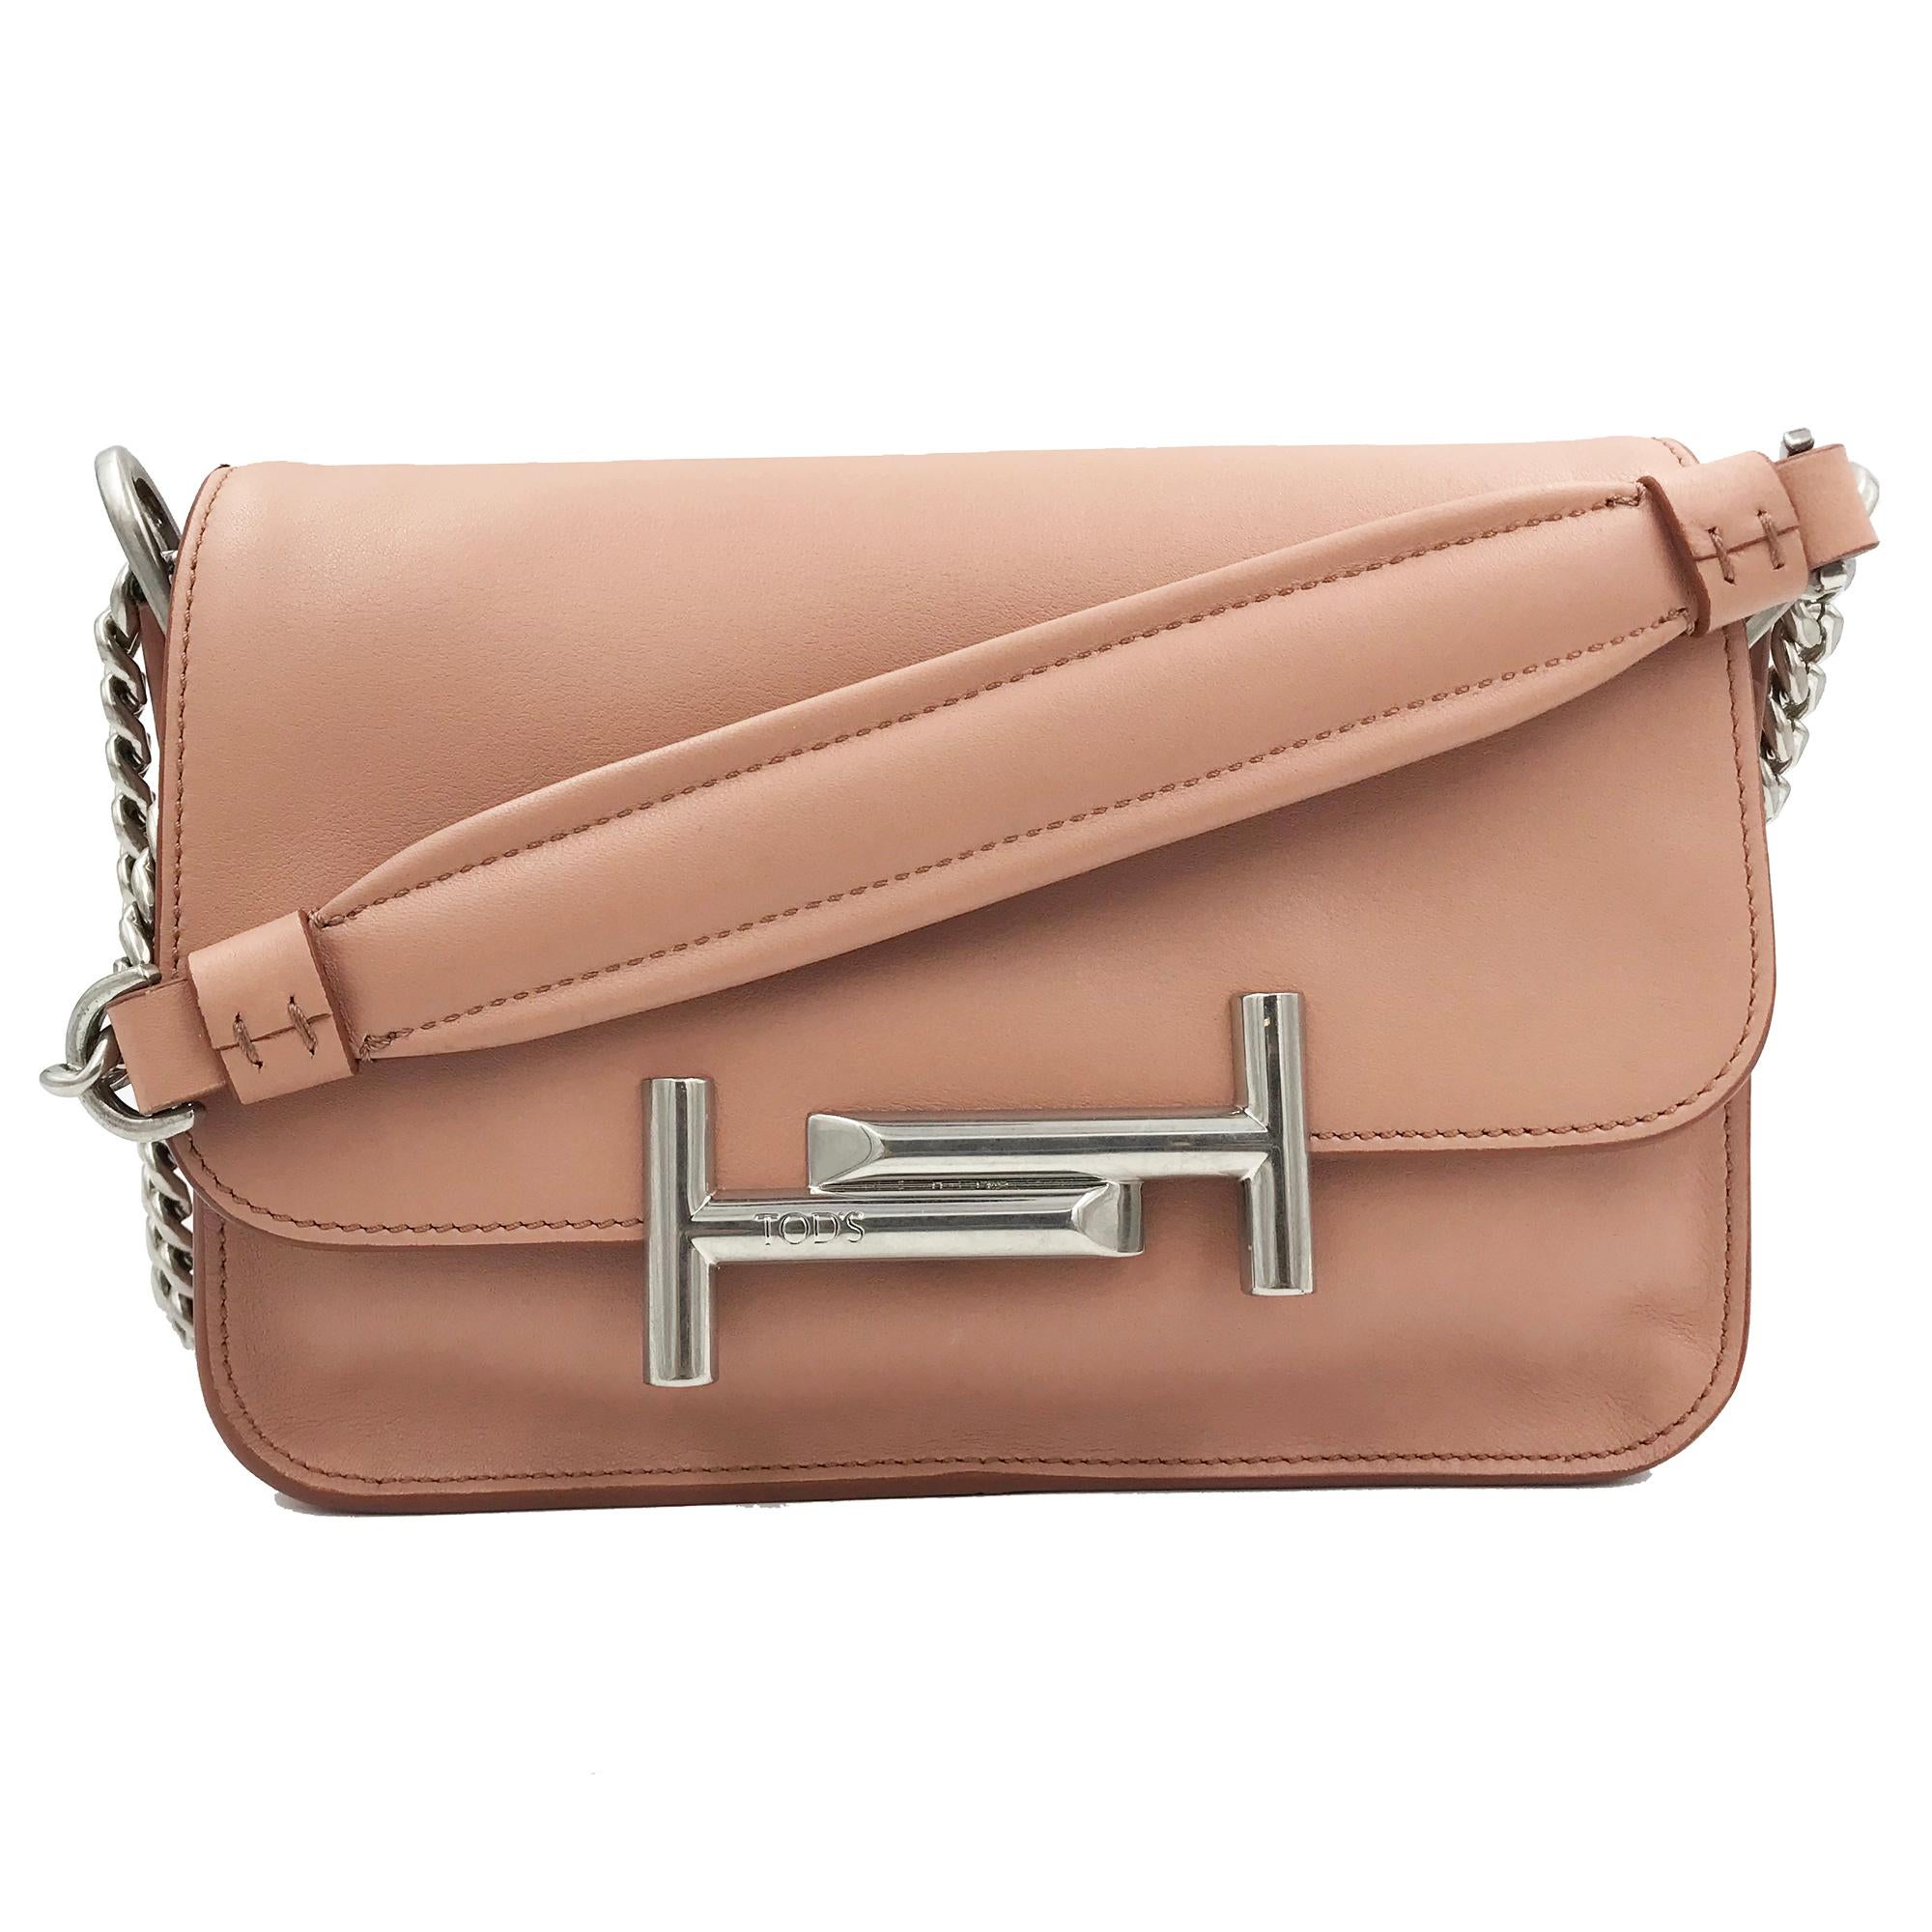 Double T Shoulder Bag Shoulder Bag Shoulder strap Logo Measurements: 22x15x8 cm Strap: 32 cm Leather Made in Italy
Details:
Brand	Tod's
Strap Drop	19 Inches
Size	Small
Length	8.5 Inches
Height	6 Inches
Depth	3 Inches
Style	Shoulder Bag
Stock